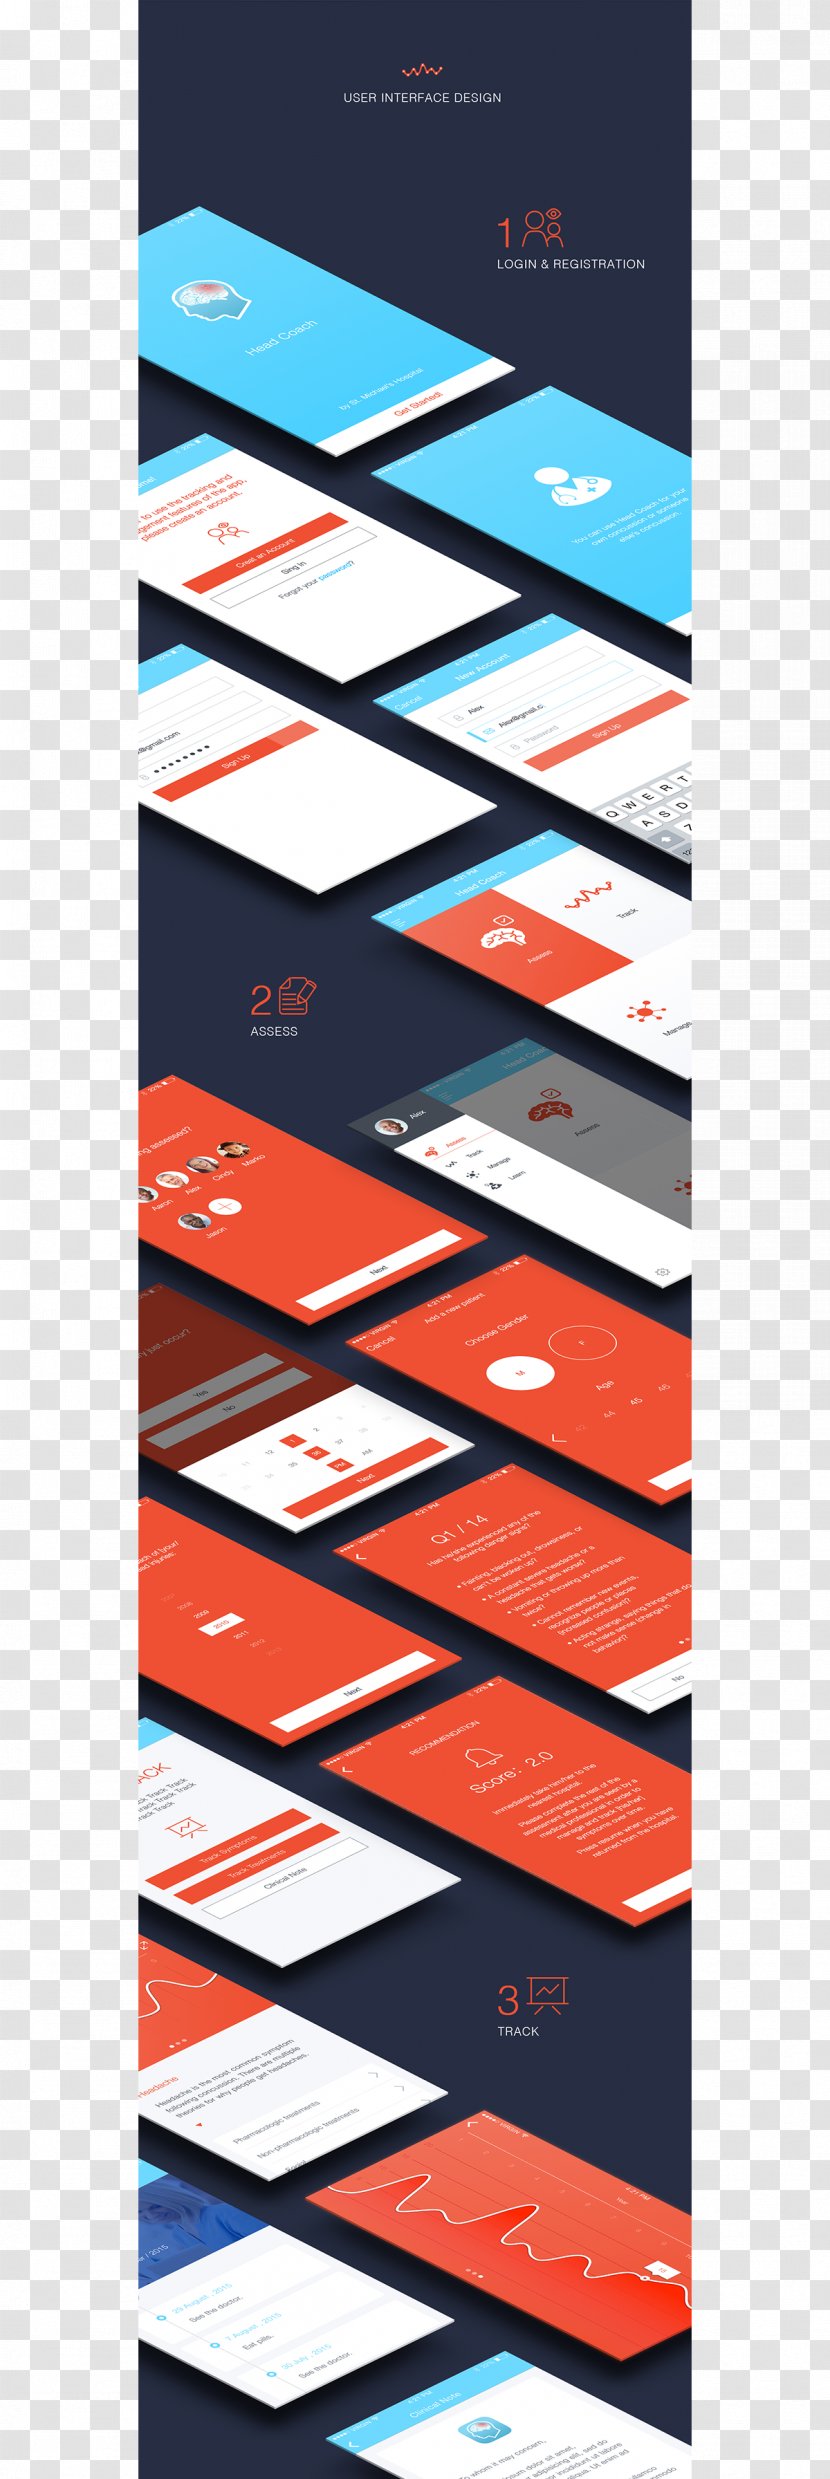 User Interface Design Graphical - Advertising Transparent PNG